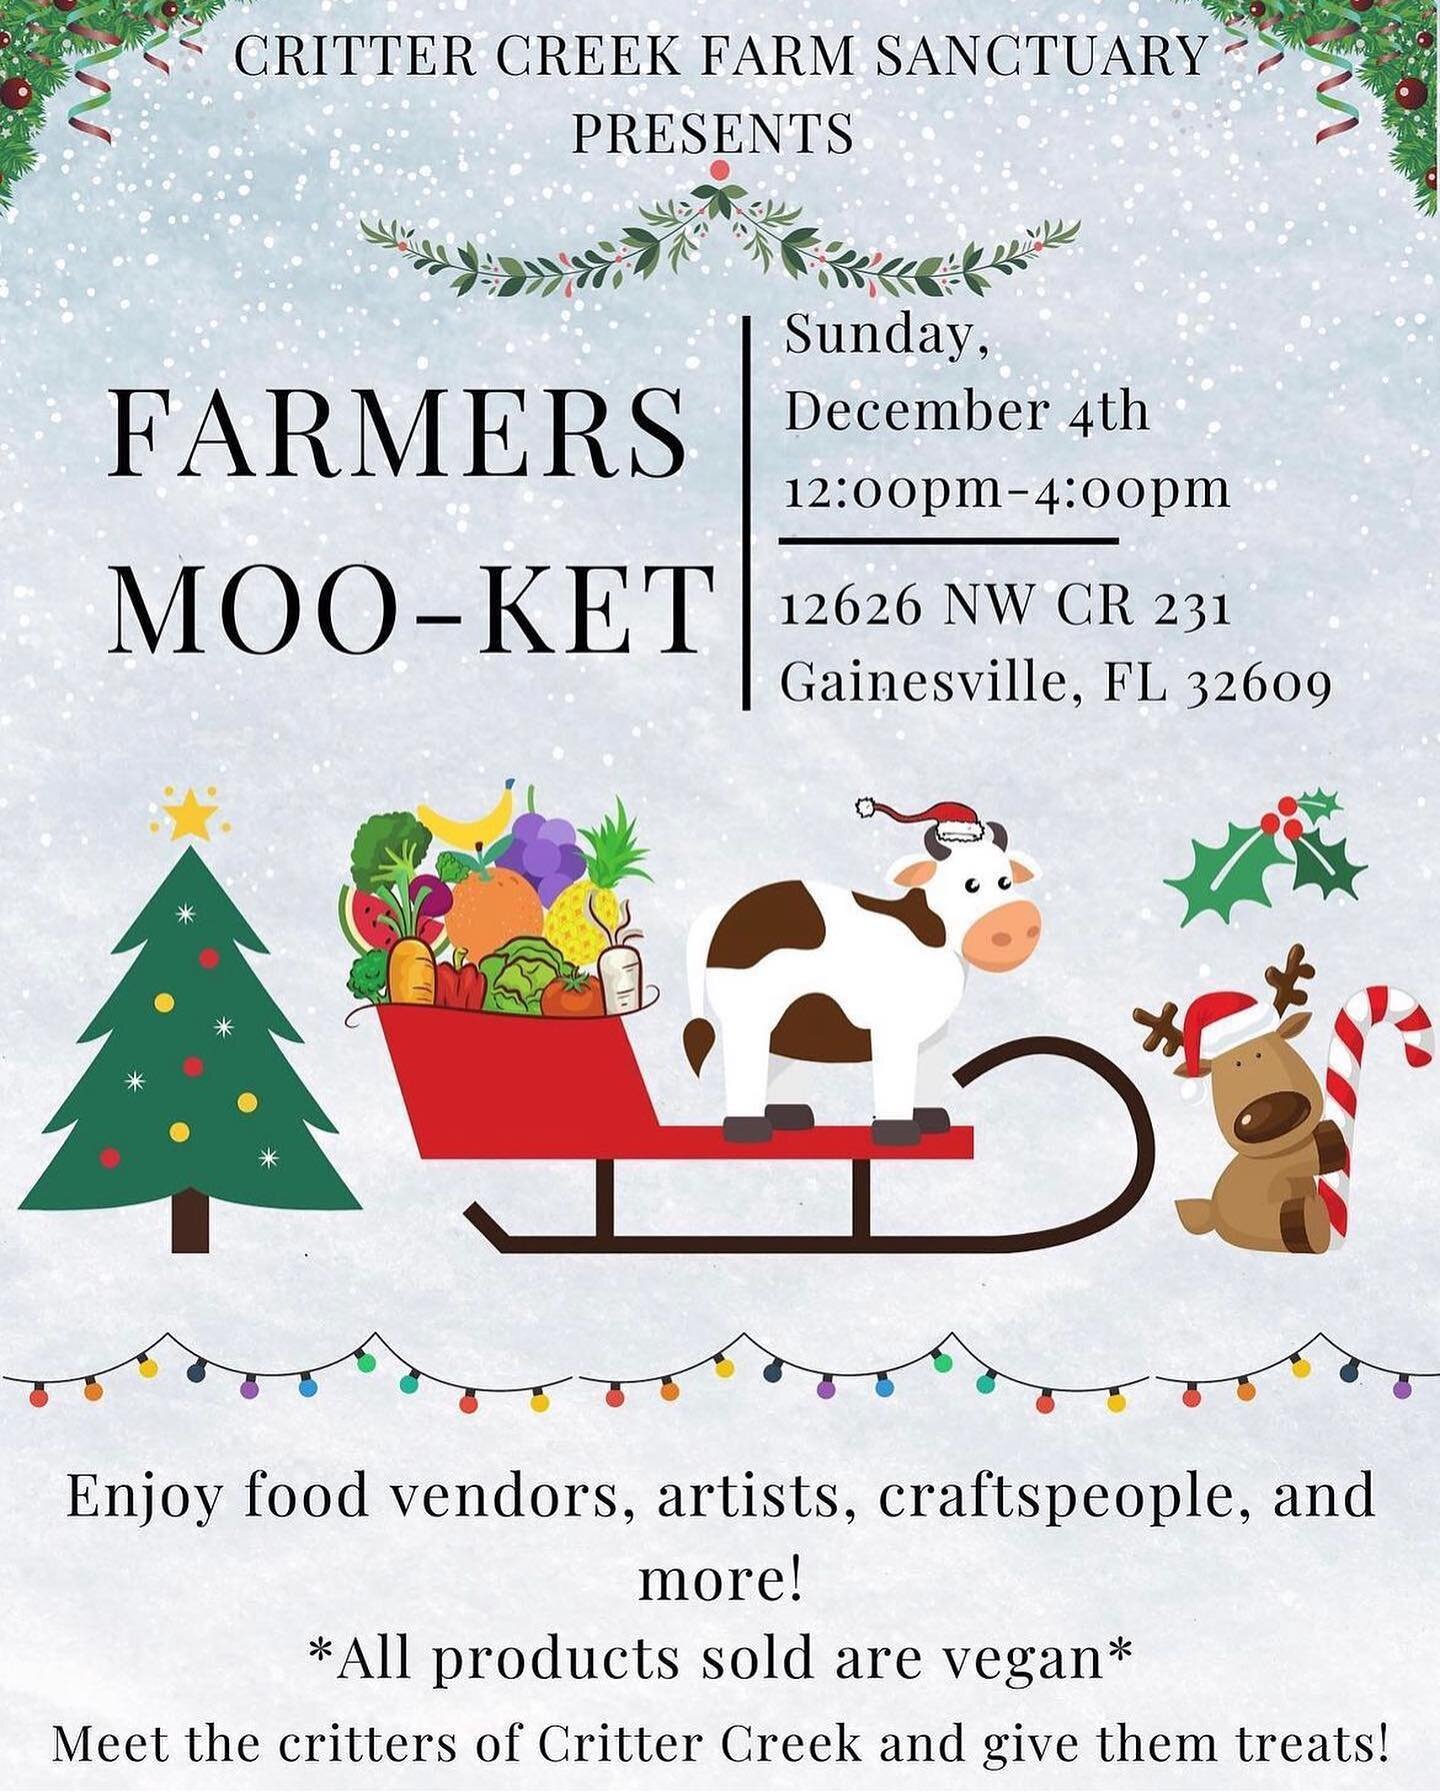 Hey friends! We&rsquo;re thrilled to be open today and to announce that we&rsquo;ll be back at the @crittercreekfarmsanctuary Mooket this coming Sunday!!

This monthly market brings in vegan vendors from all over and also gives everyone a chance to m